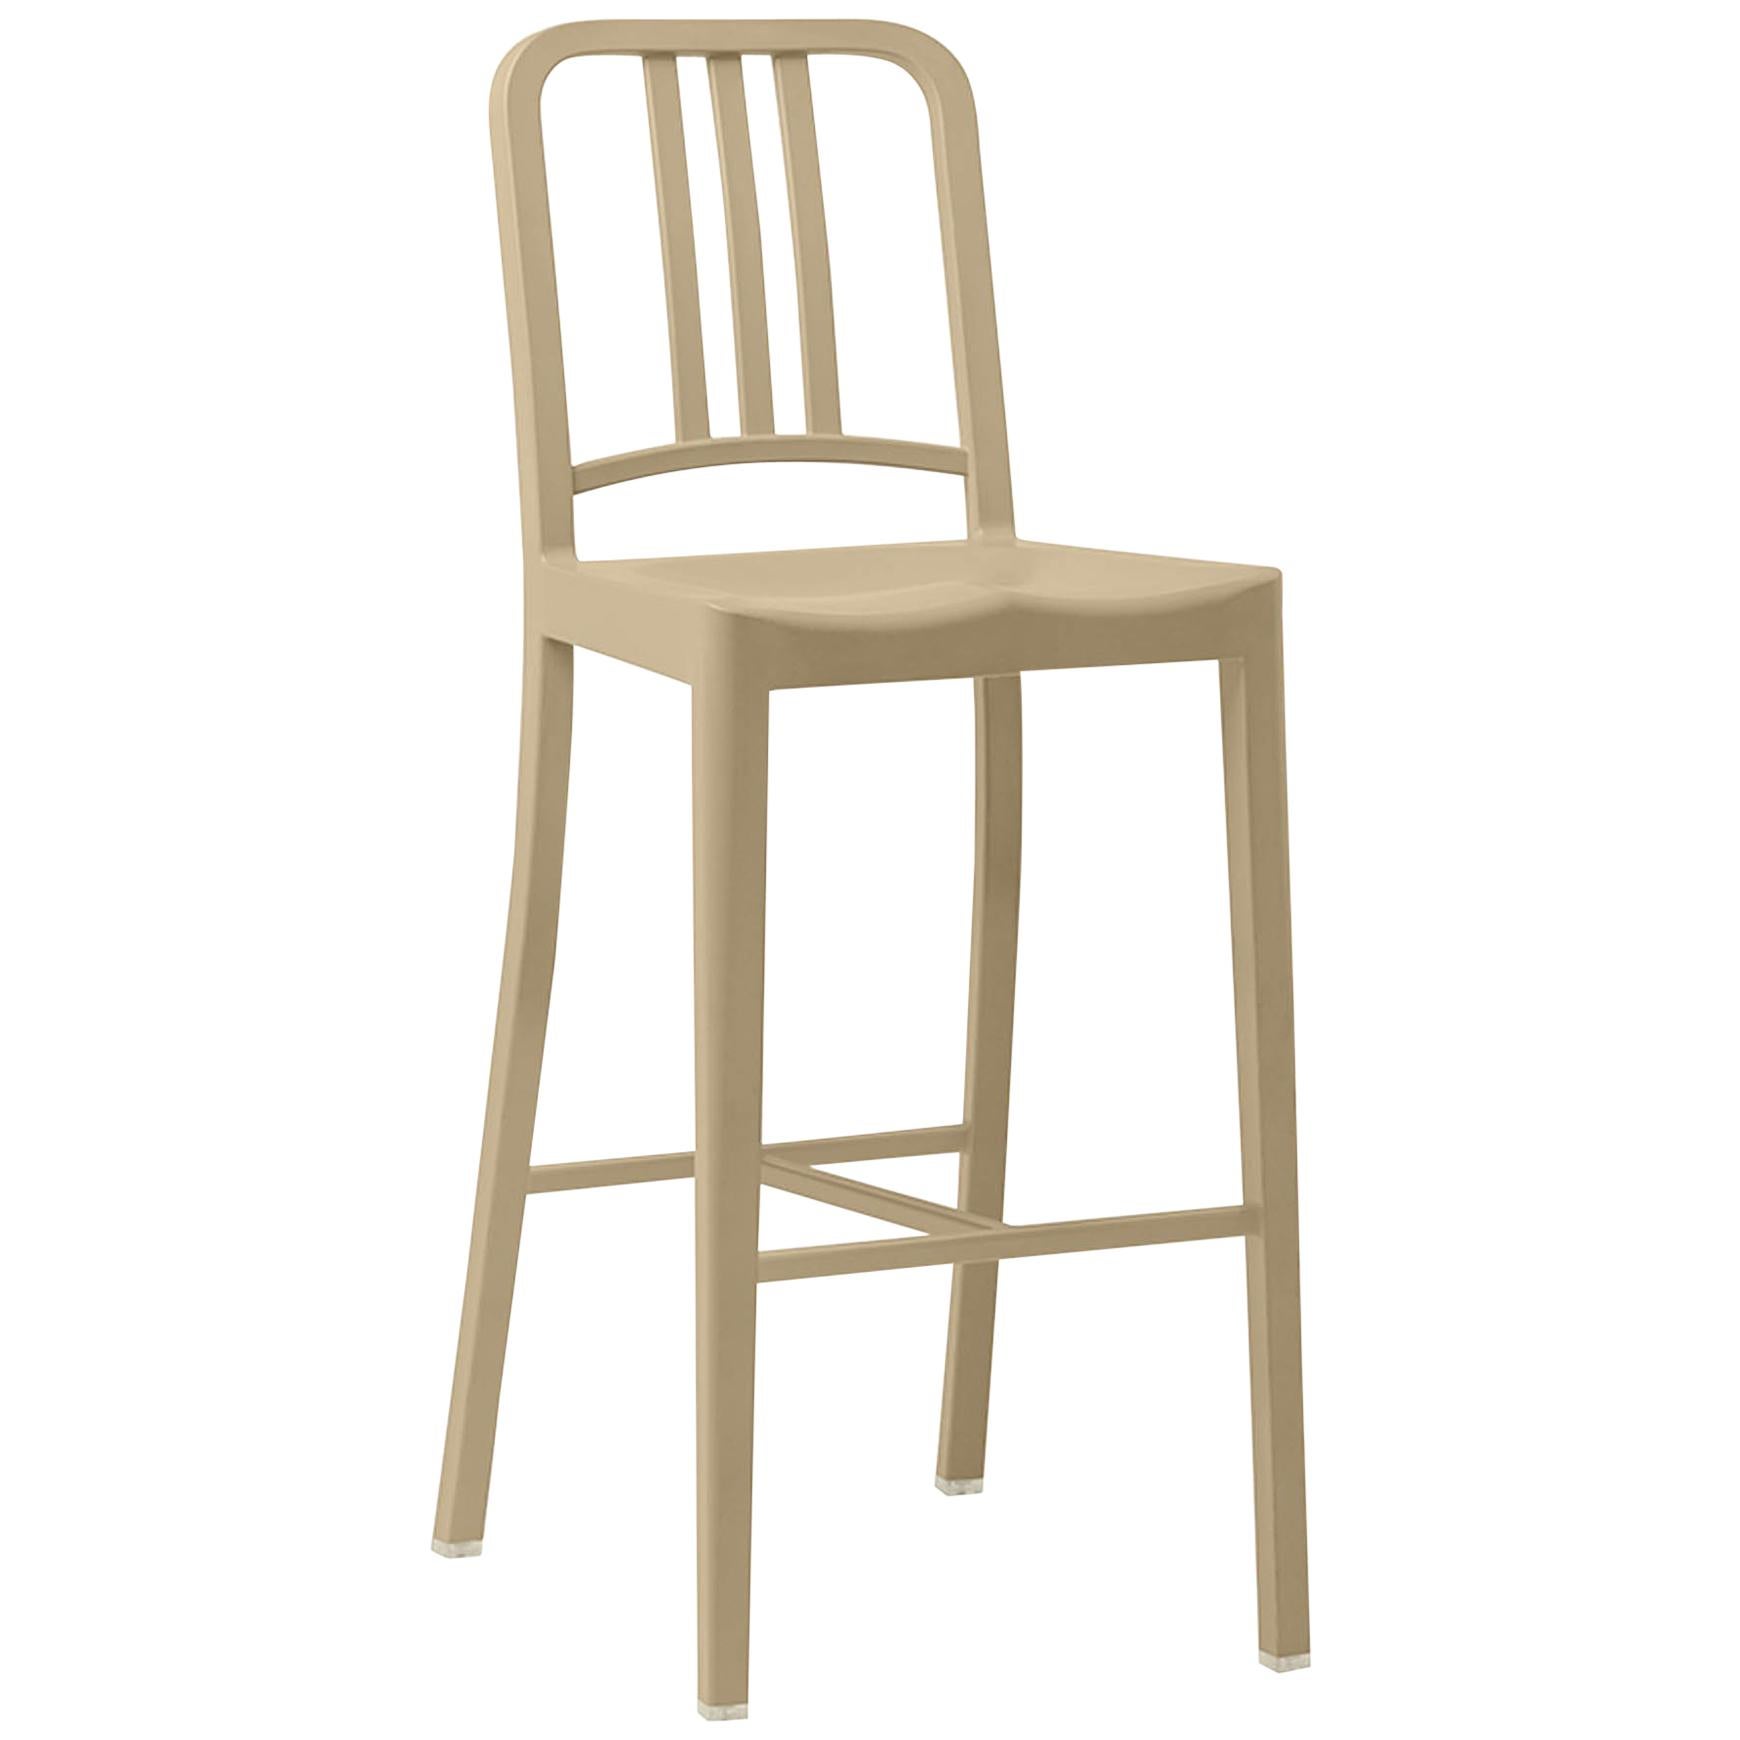 Emeco 111 Navy Barstool in Beach by Coca-Cola For Sale